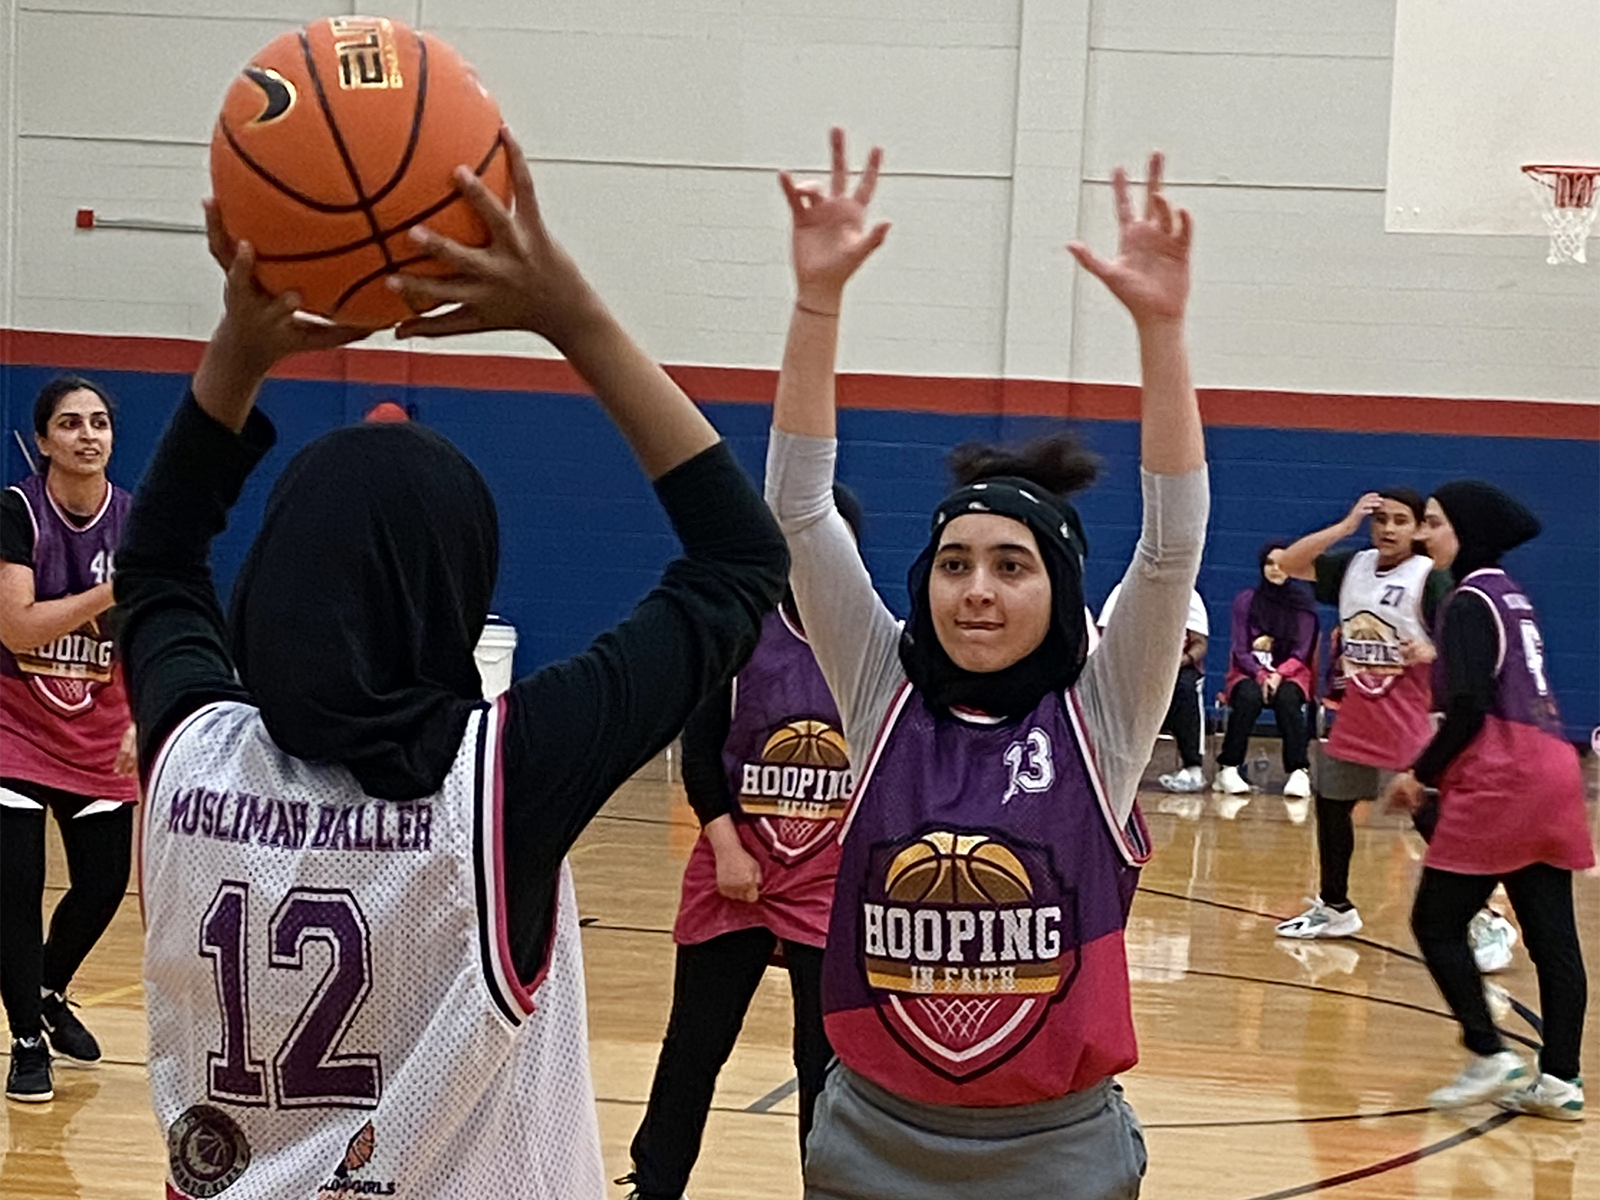 Amna Masoud, right, defends during an inbound play at a Hooping in Faith program in July 2023 in Memphis, Tenn. Photo by Liz Kineke